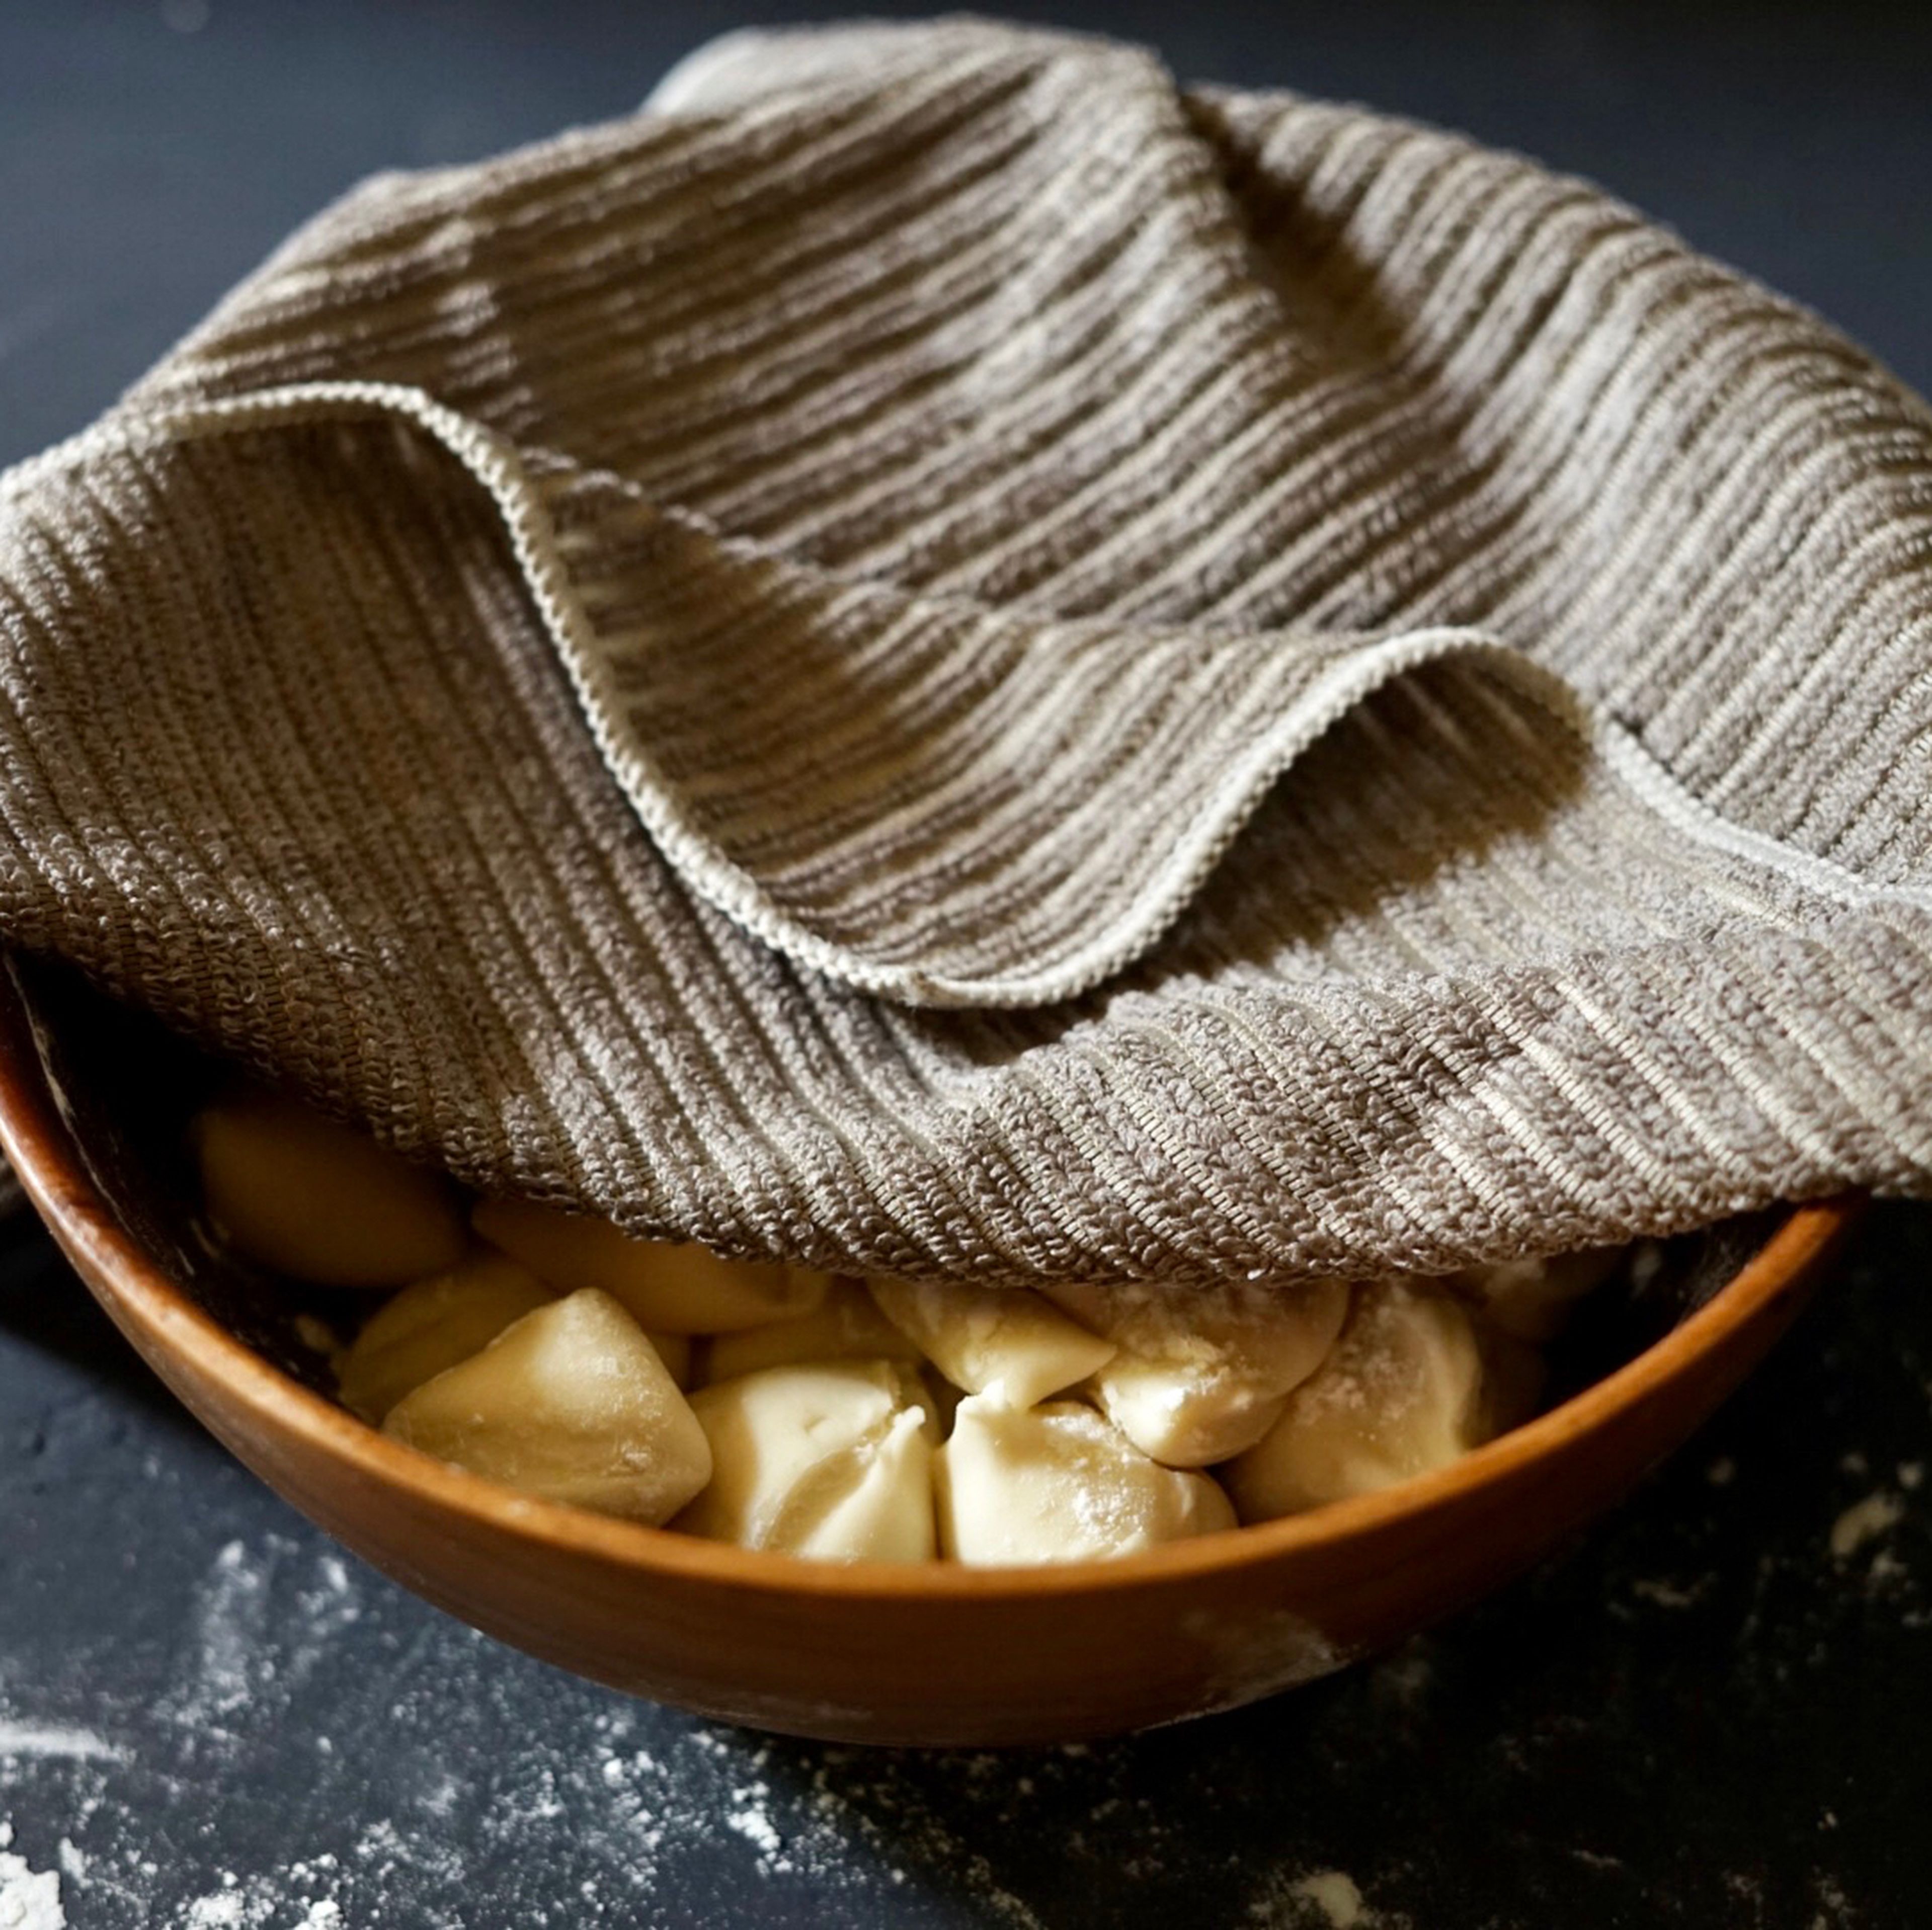 Place the dough pieces in a big bowl and cover them to prevent them from drying out when you’re working.